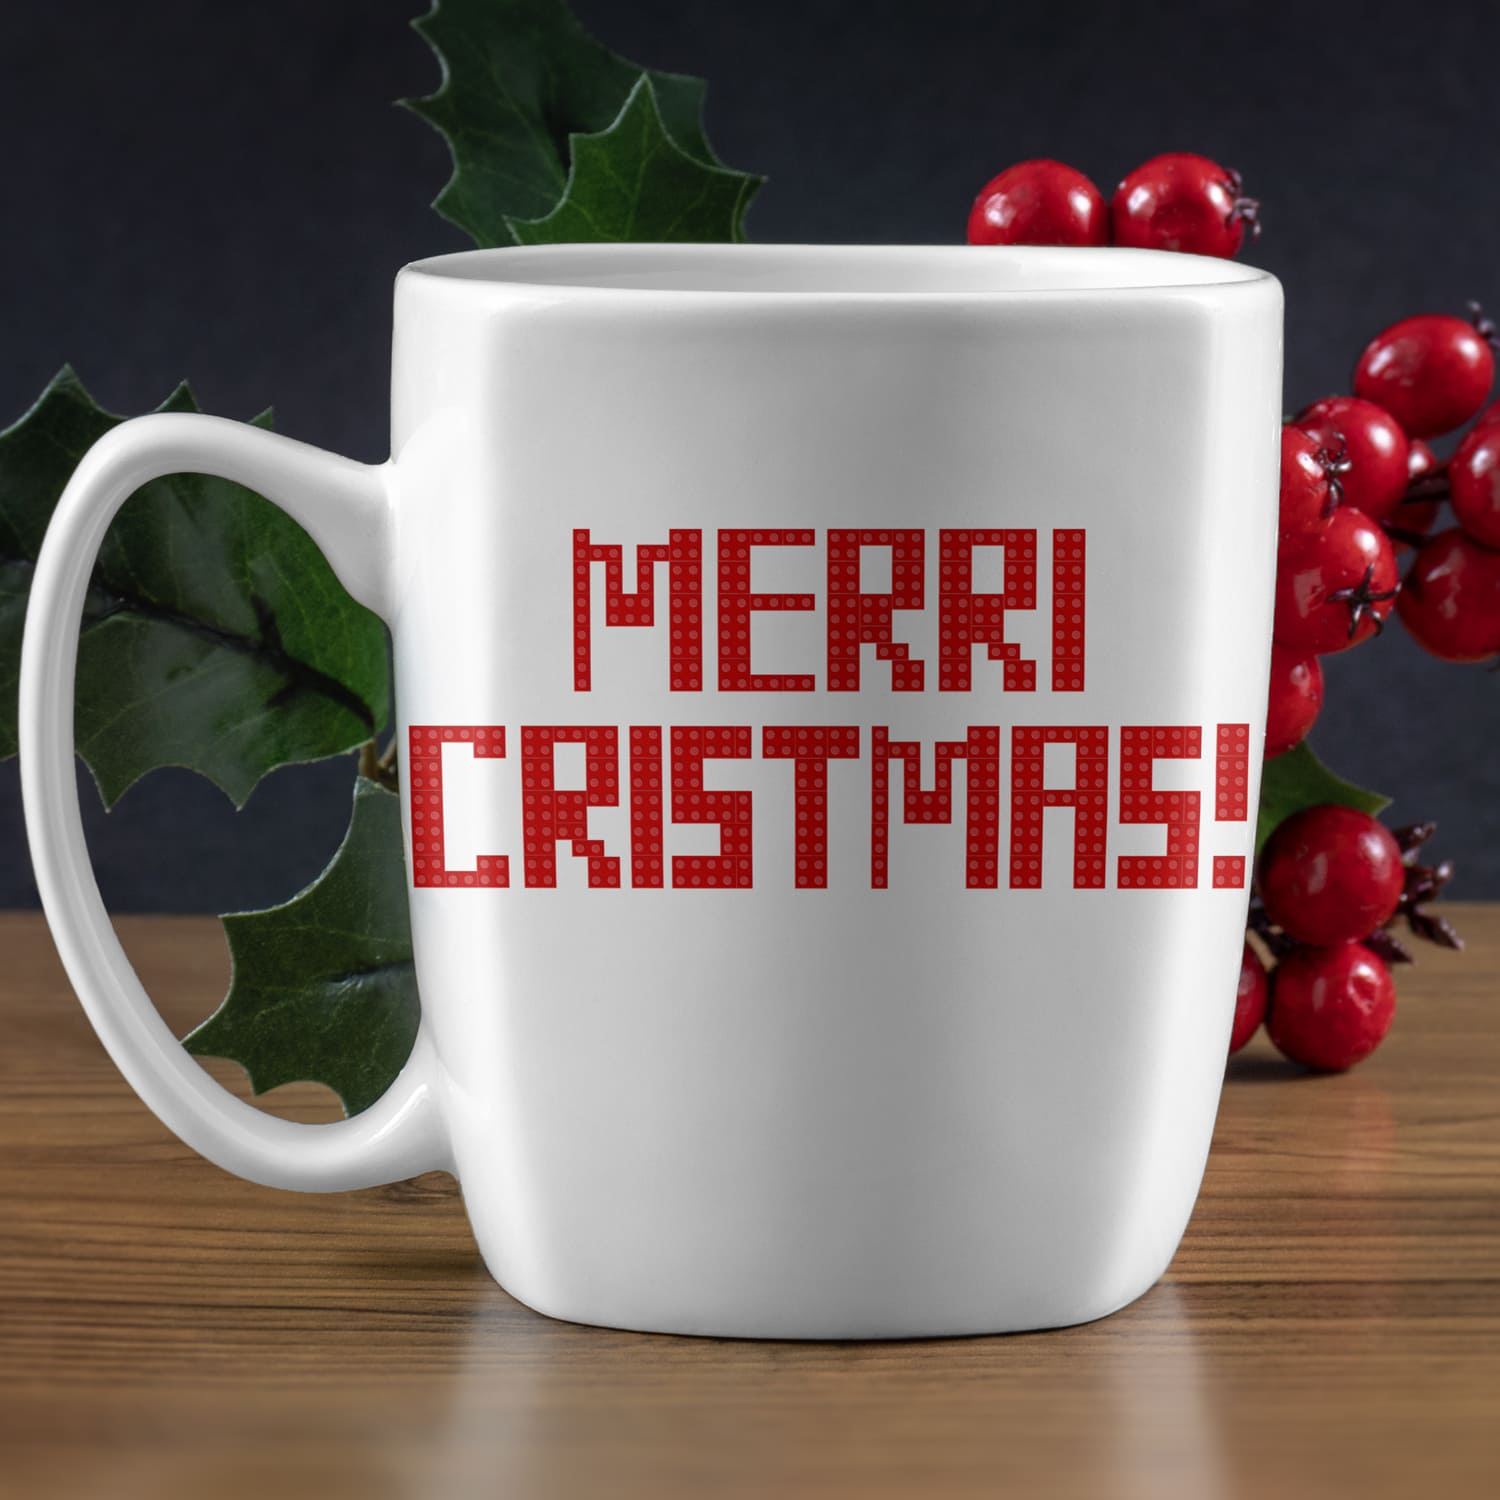 Lego christmas svg design on the cup.